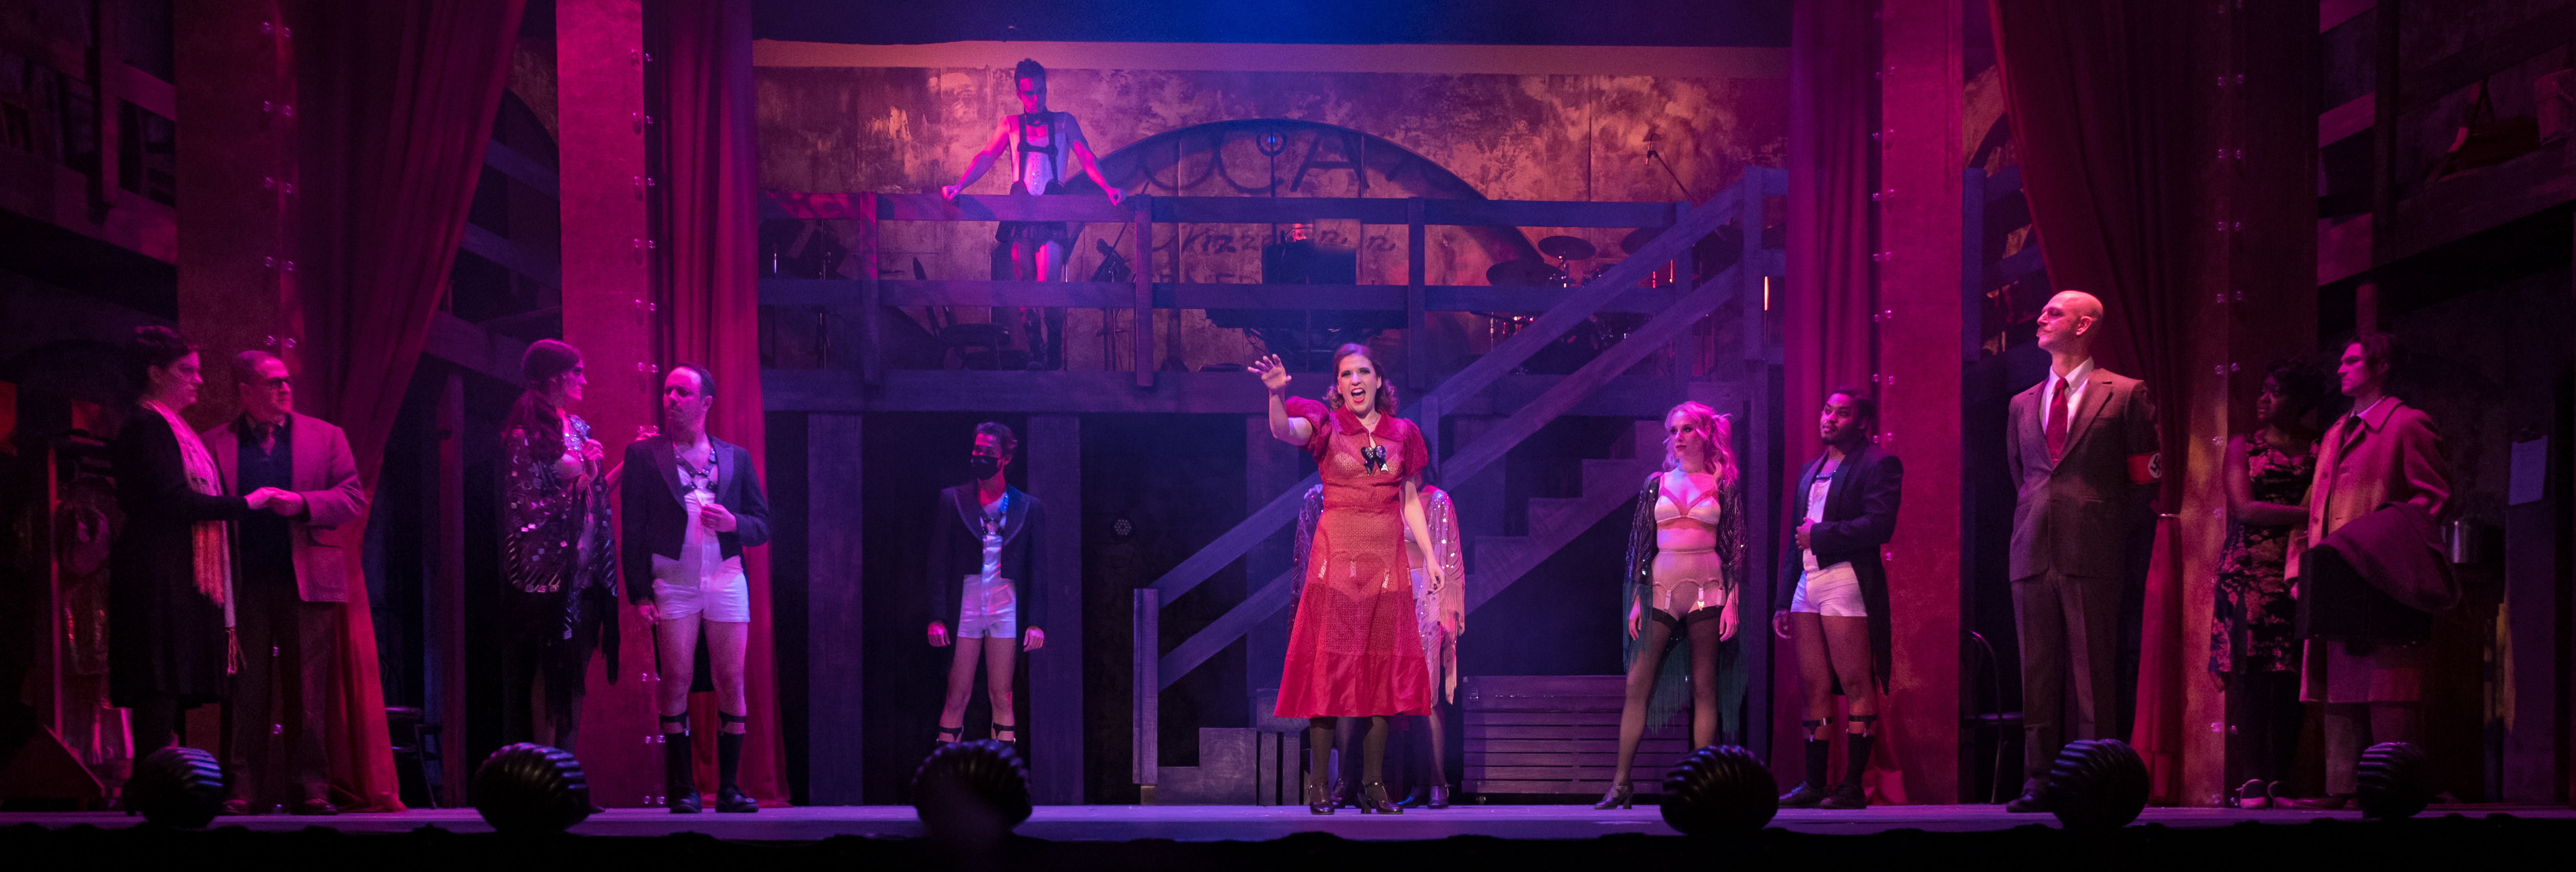 Rivertown’s ‘Cabaret’ fires on most of its cylinders